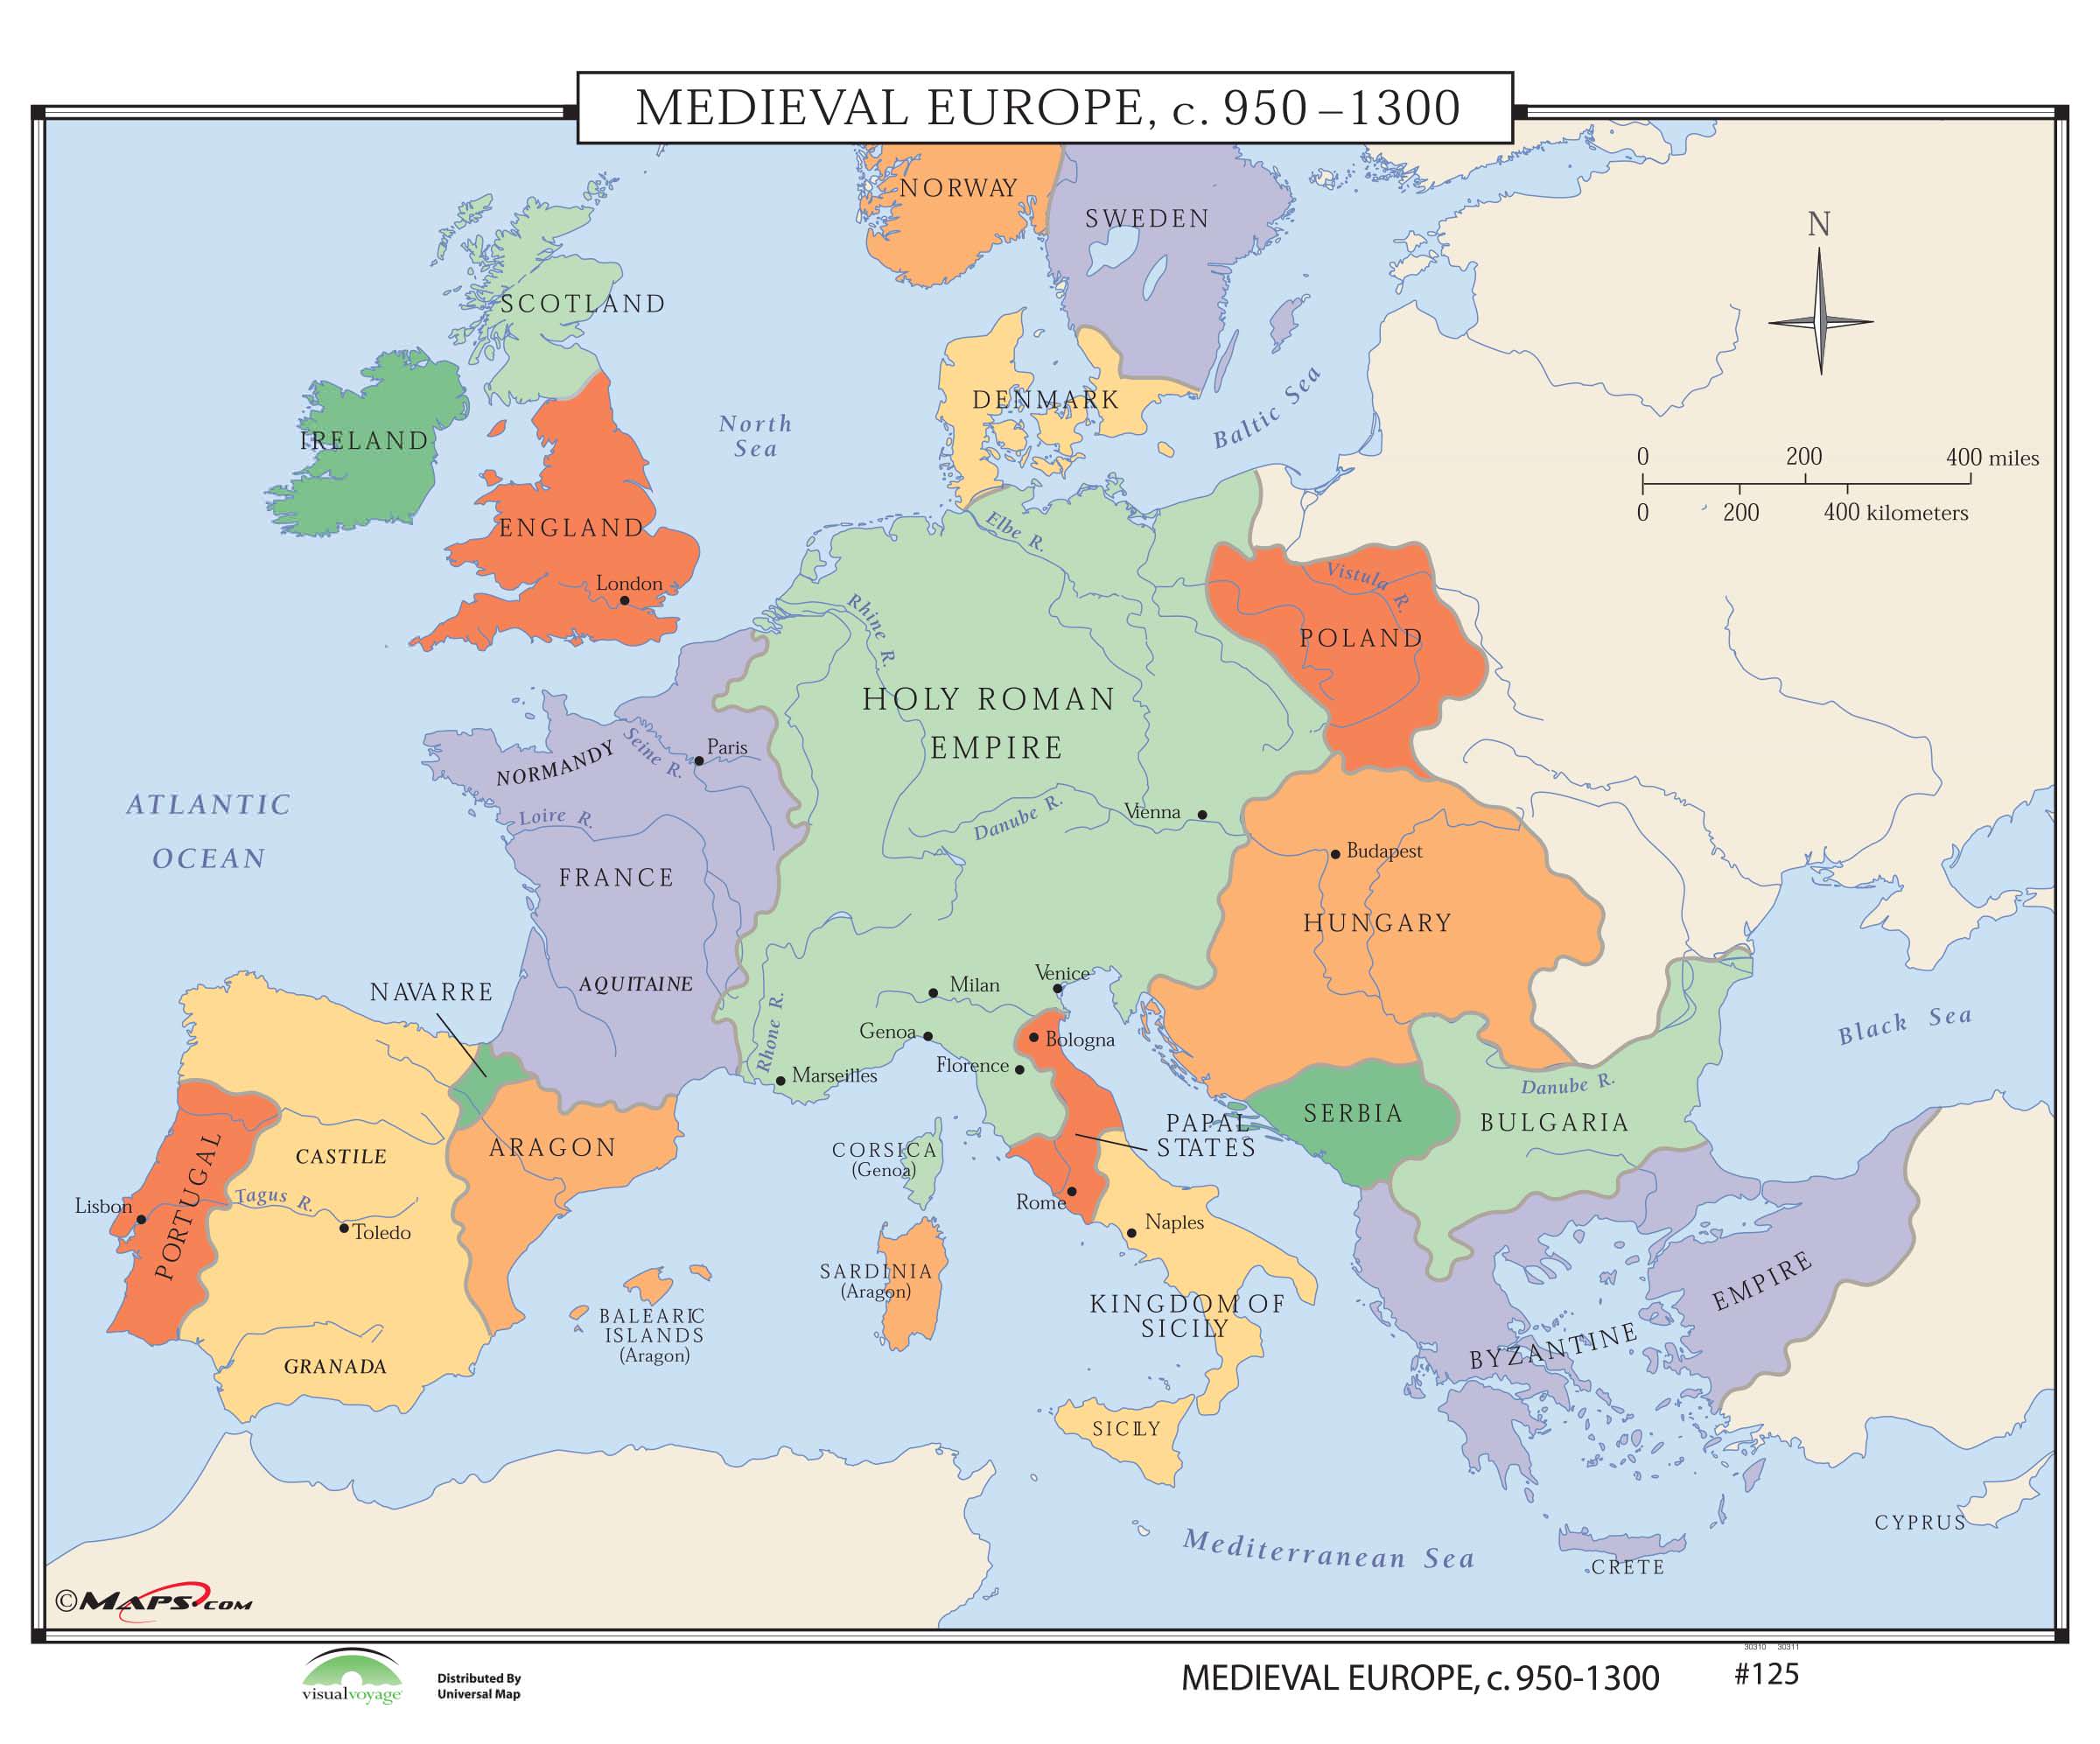 europe physical map quiz